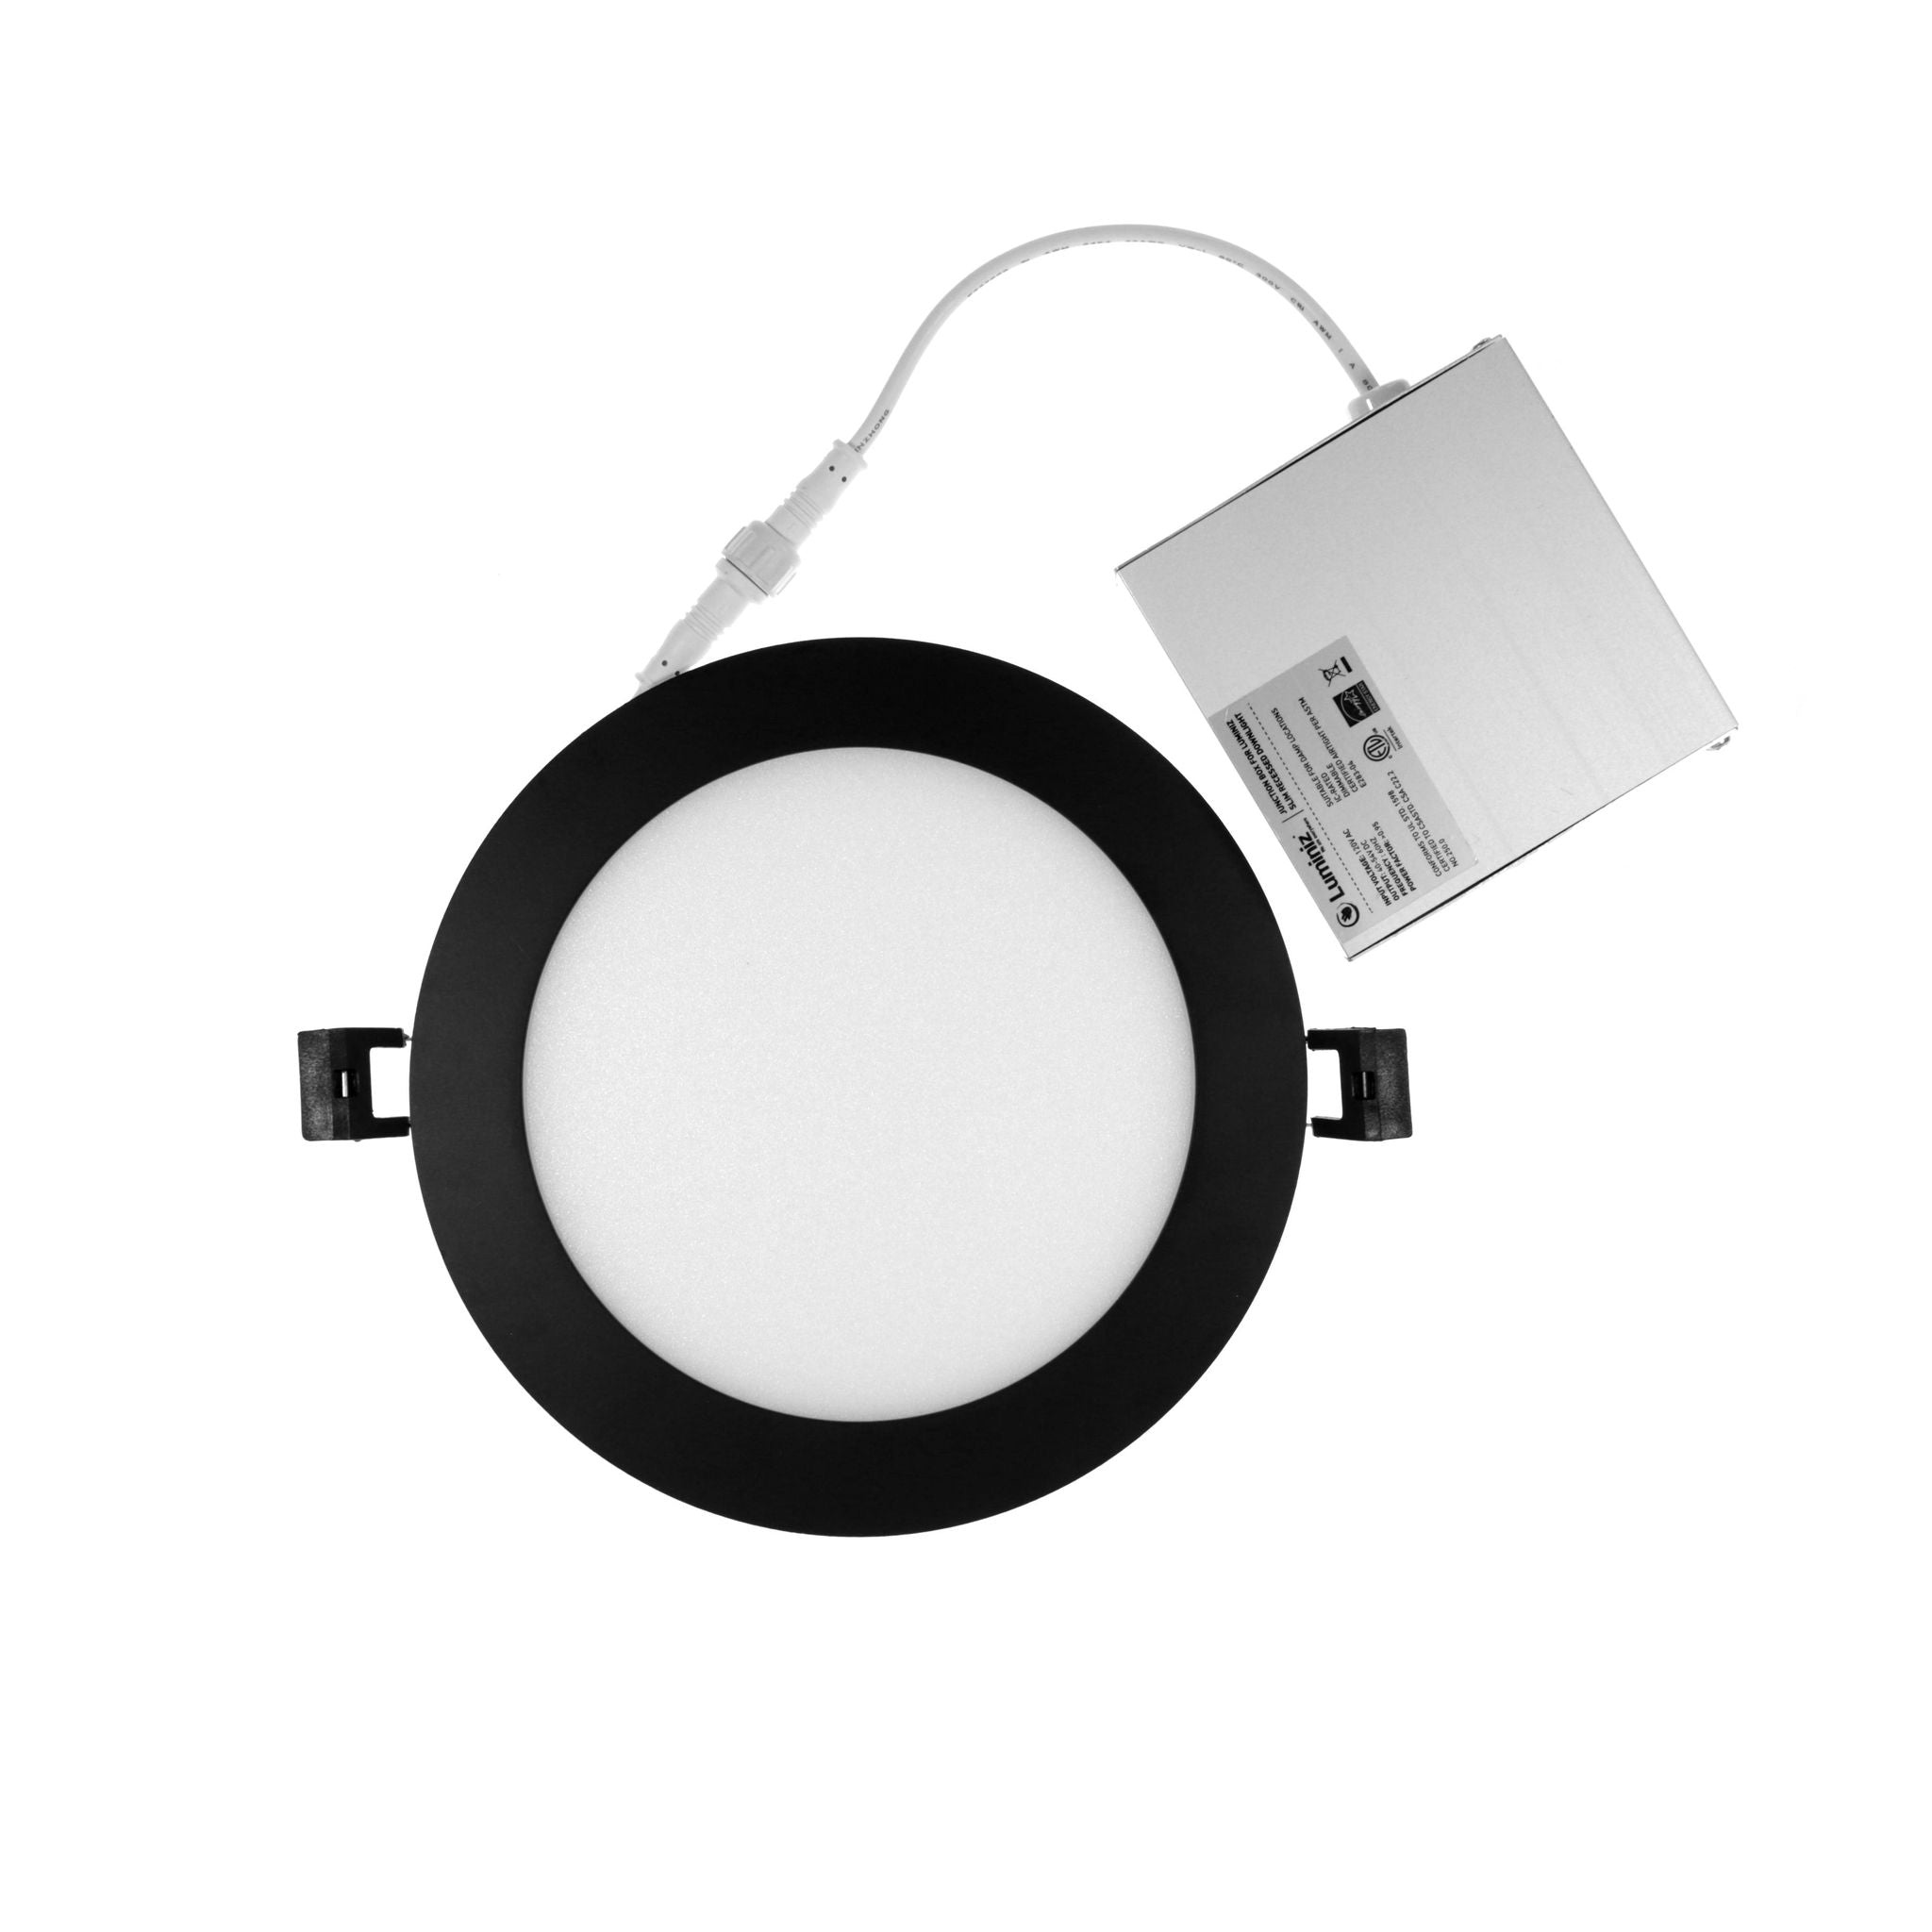 Luminiz 6'' Potlight, Single Color,4000K/5000K, junction box included with quick connect. Energy Star, ETL listed. Available in White, Black and Nickel Trim.